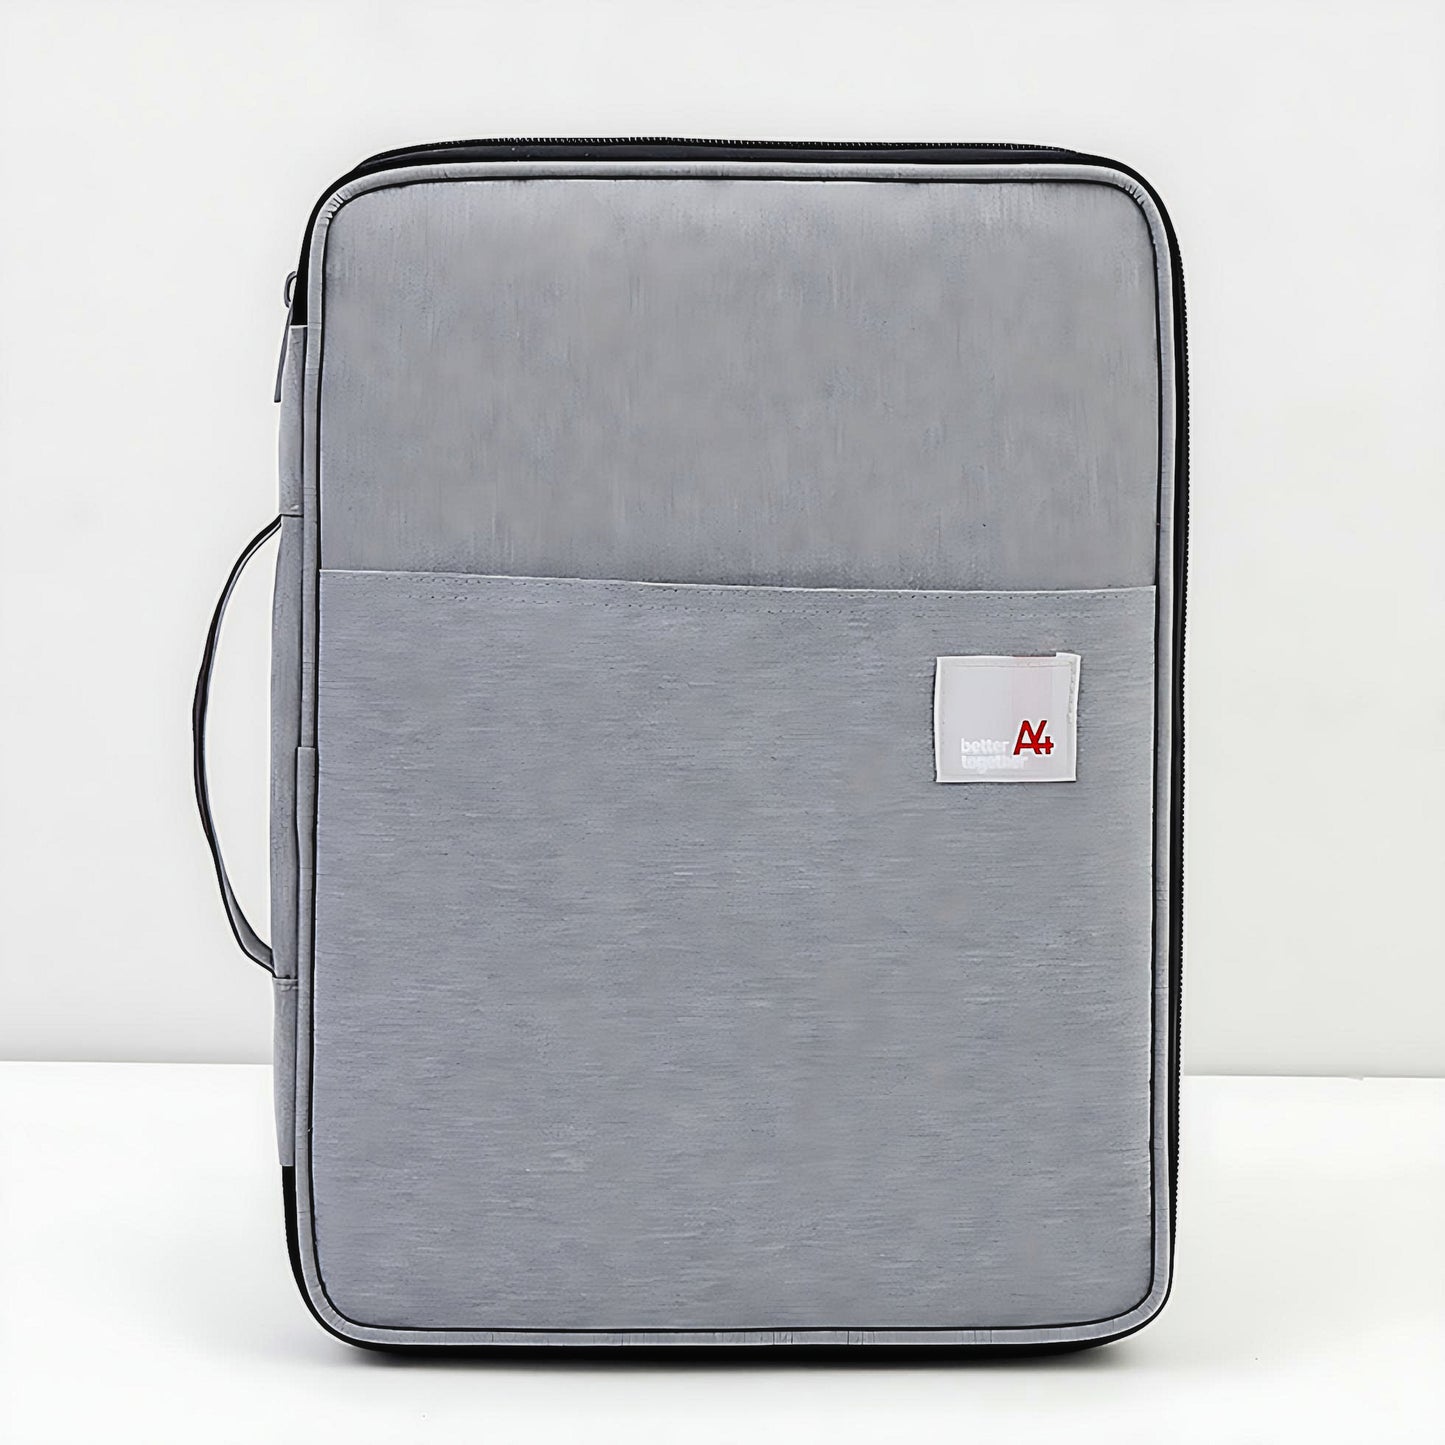 a laptop briefcase in grey color on a white background